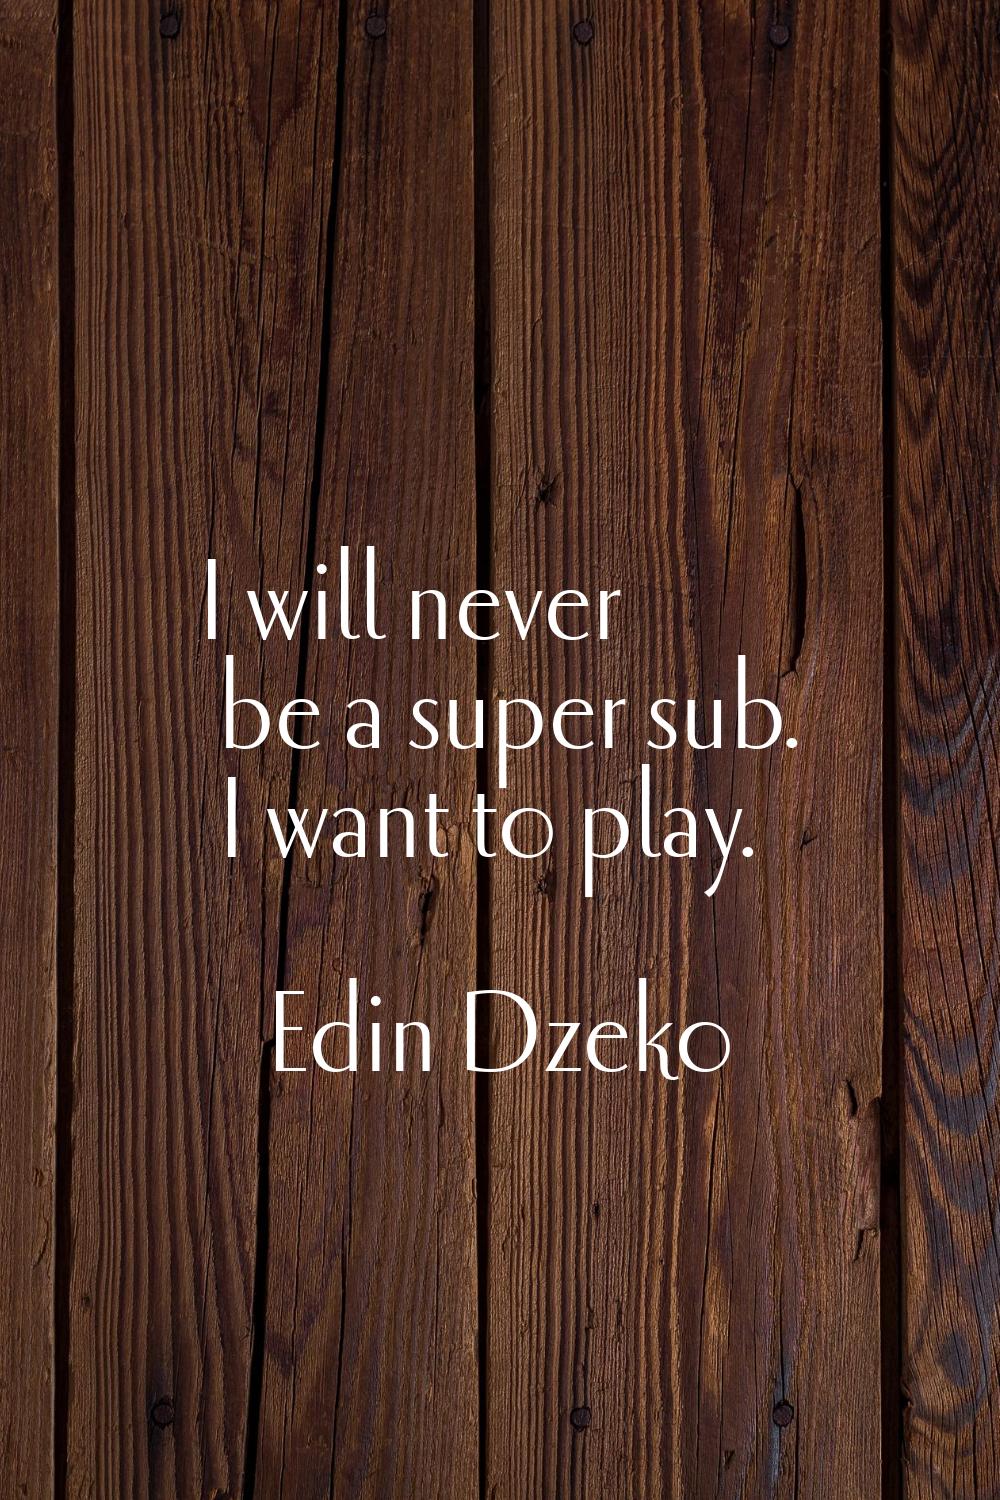 I will never be a super sub. I want to play.